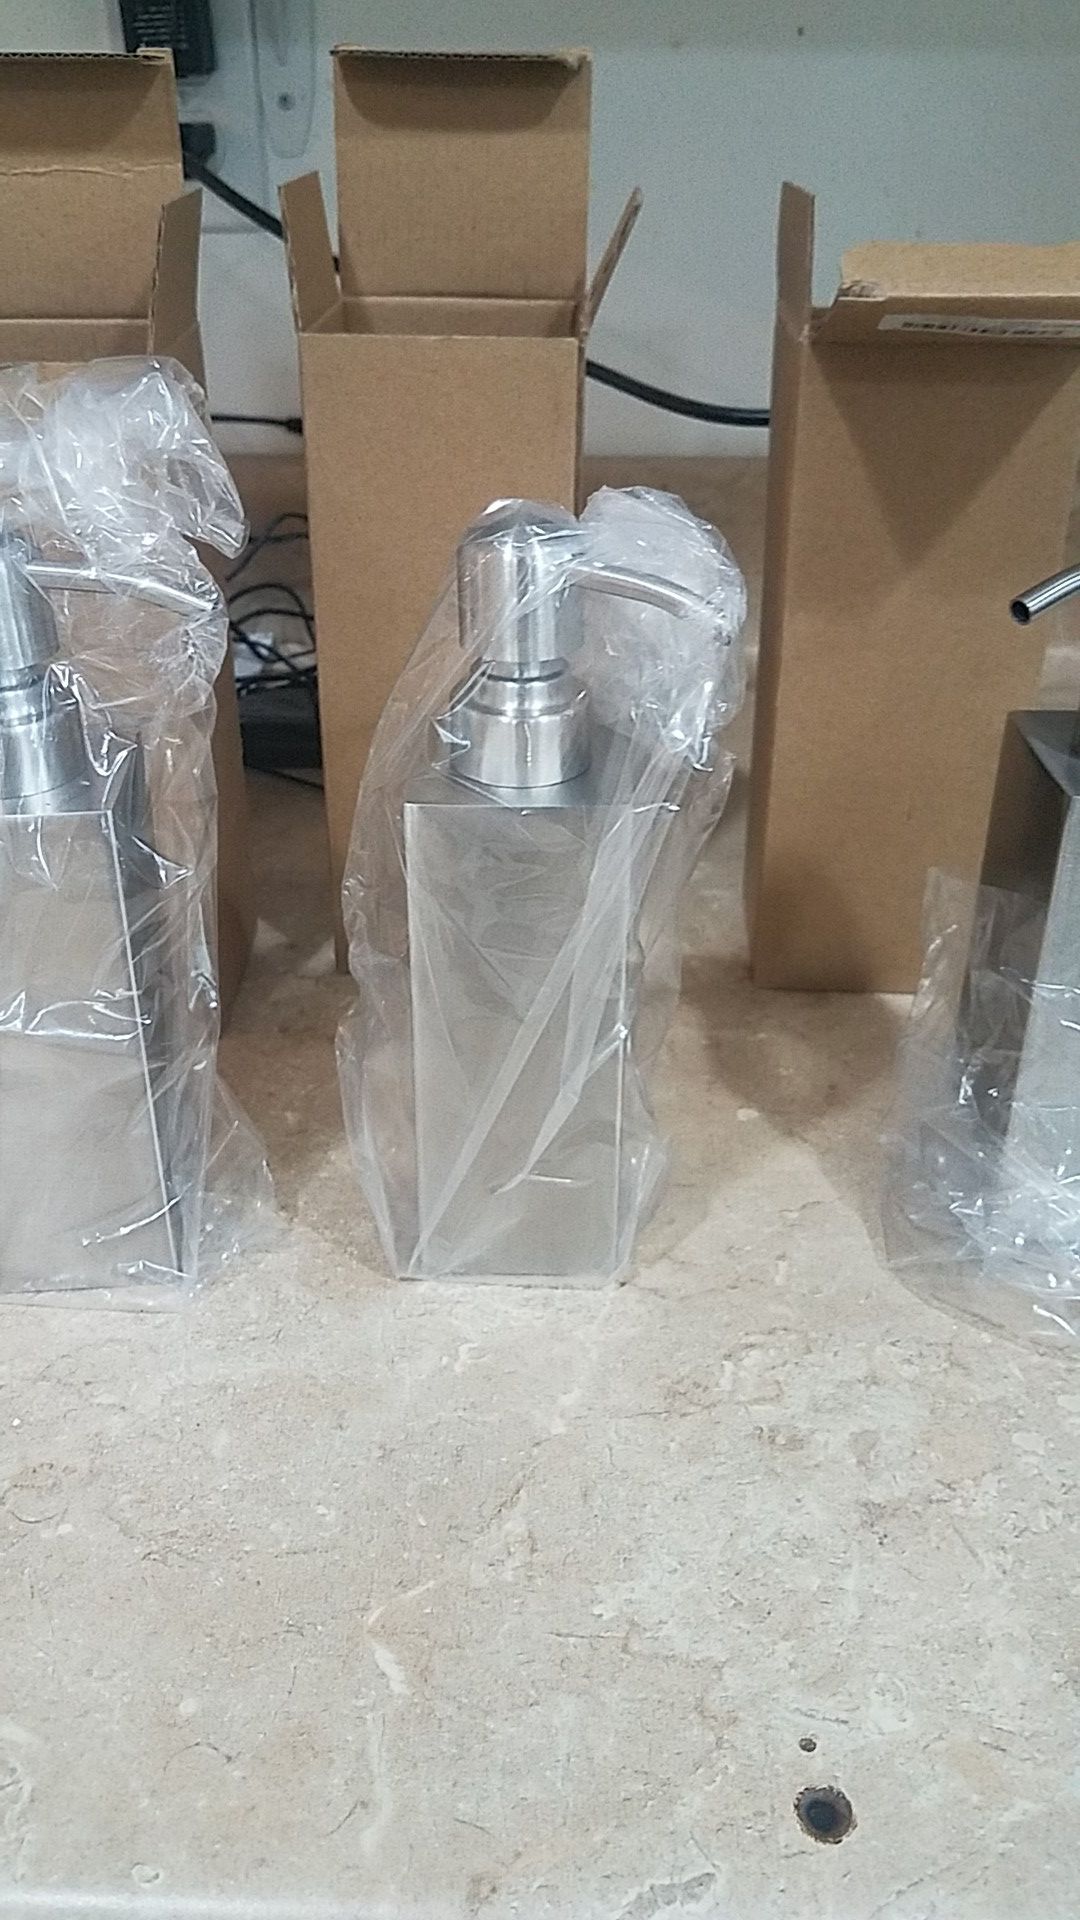 3 stainless steel soap dispensers.